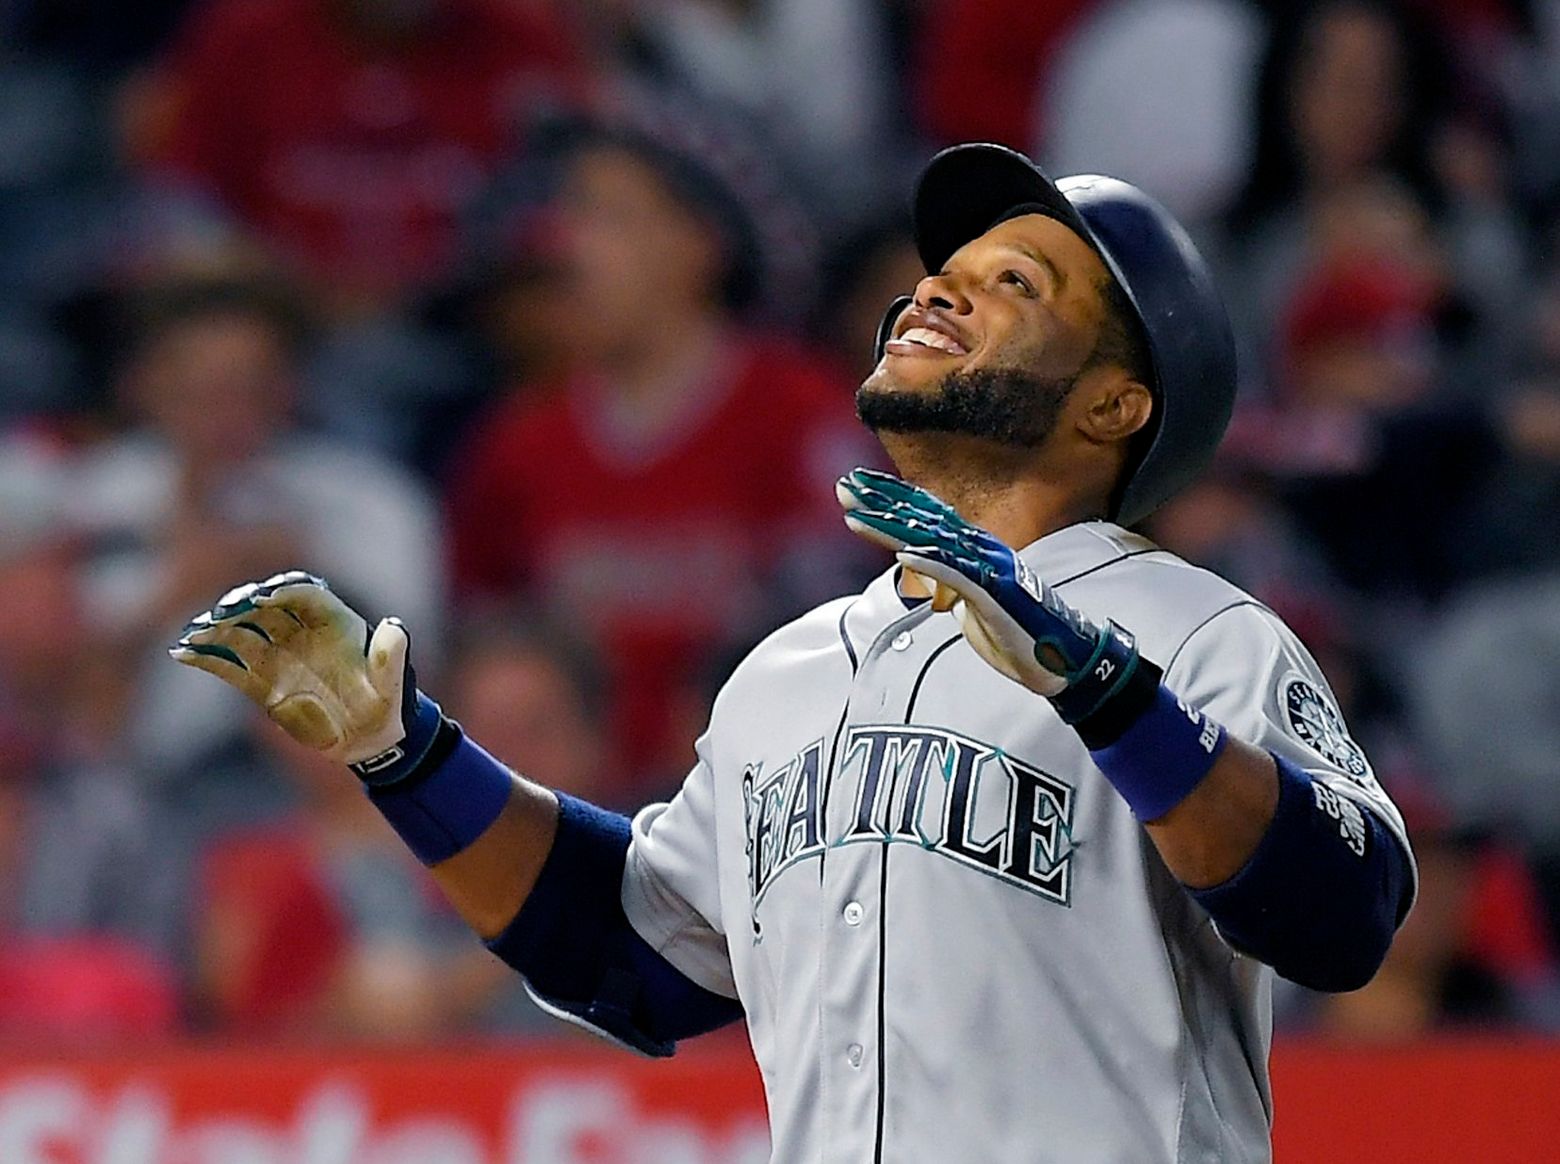 Robinson Cano Ties for 2nd-Most Homers in MLB History by 2nd